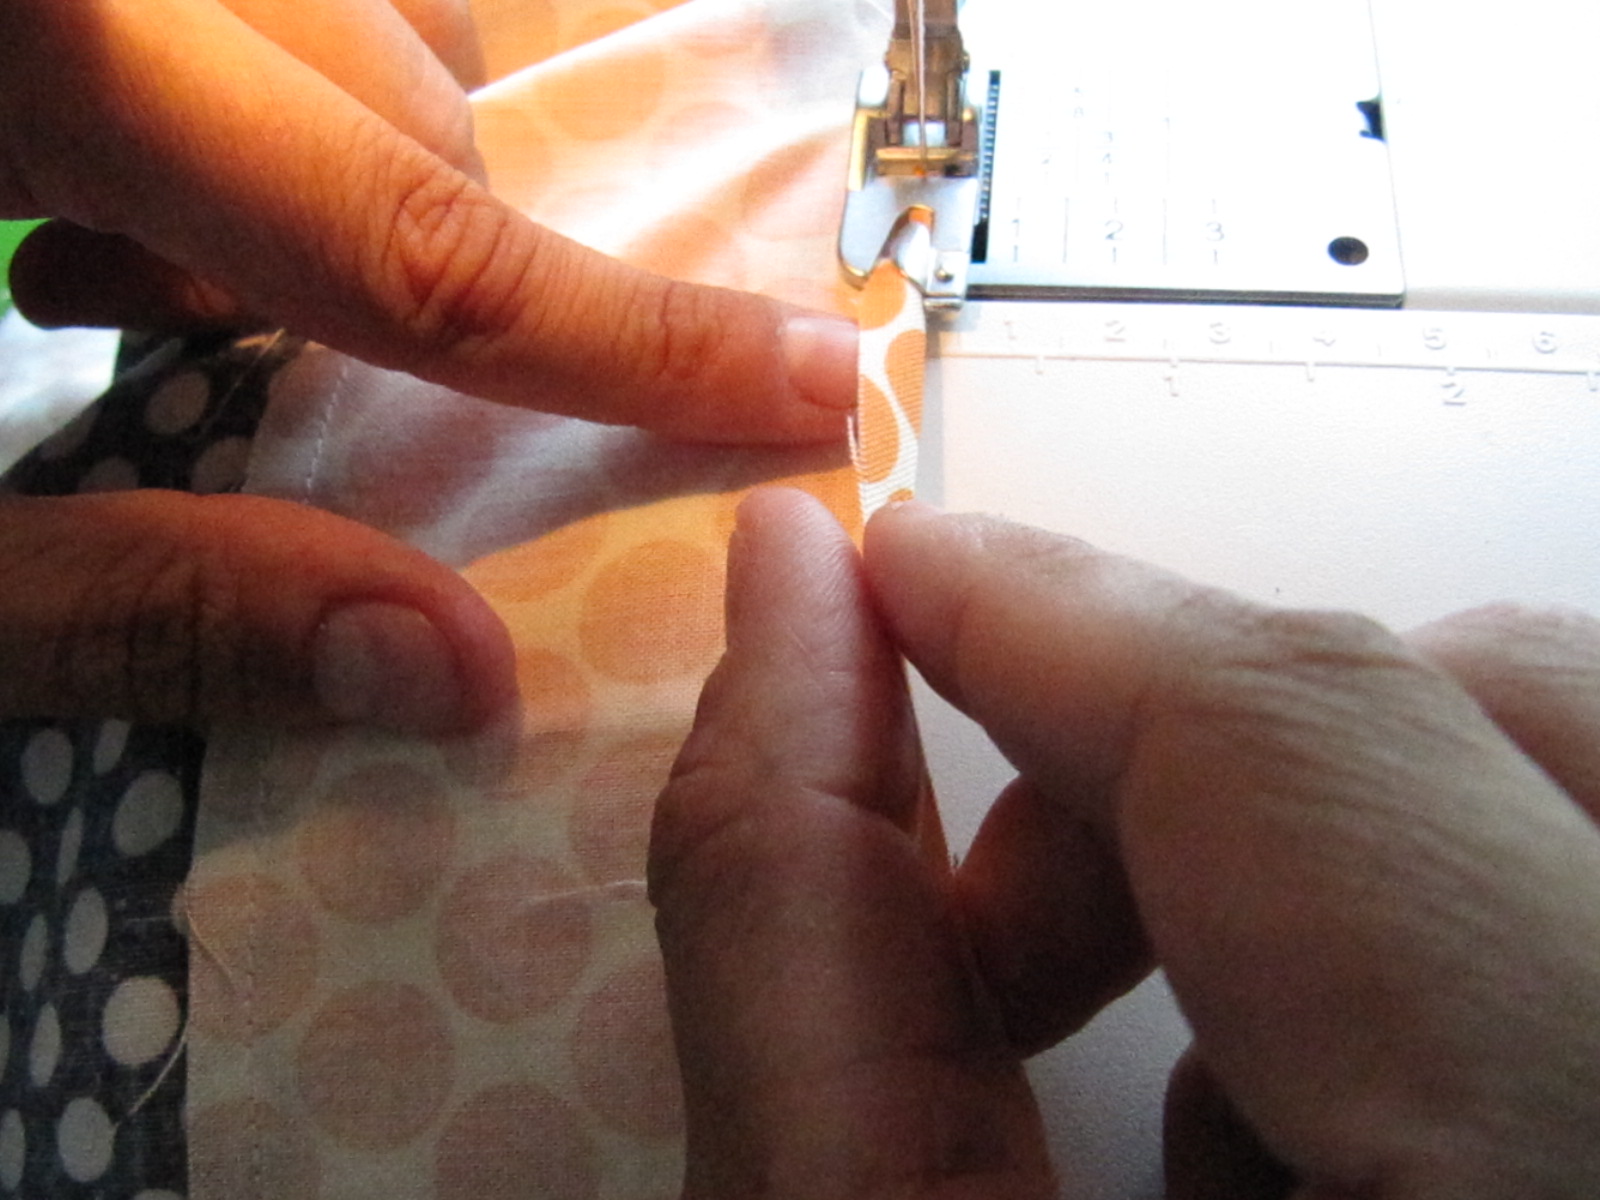 a woman is working on the sewing machine